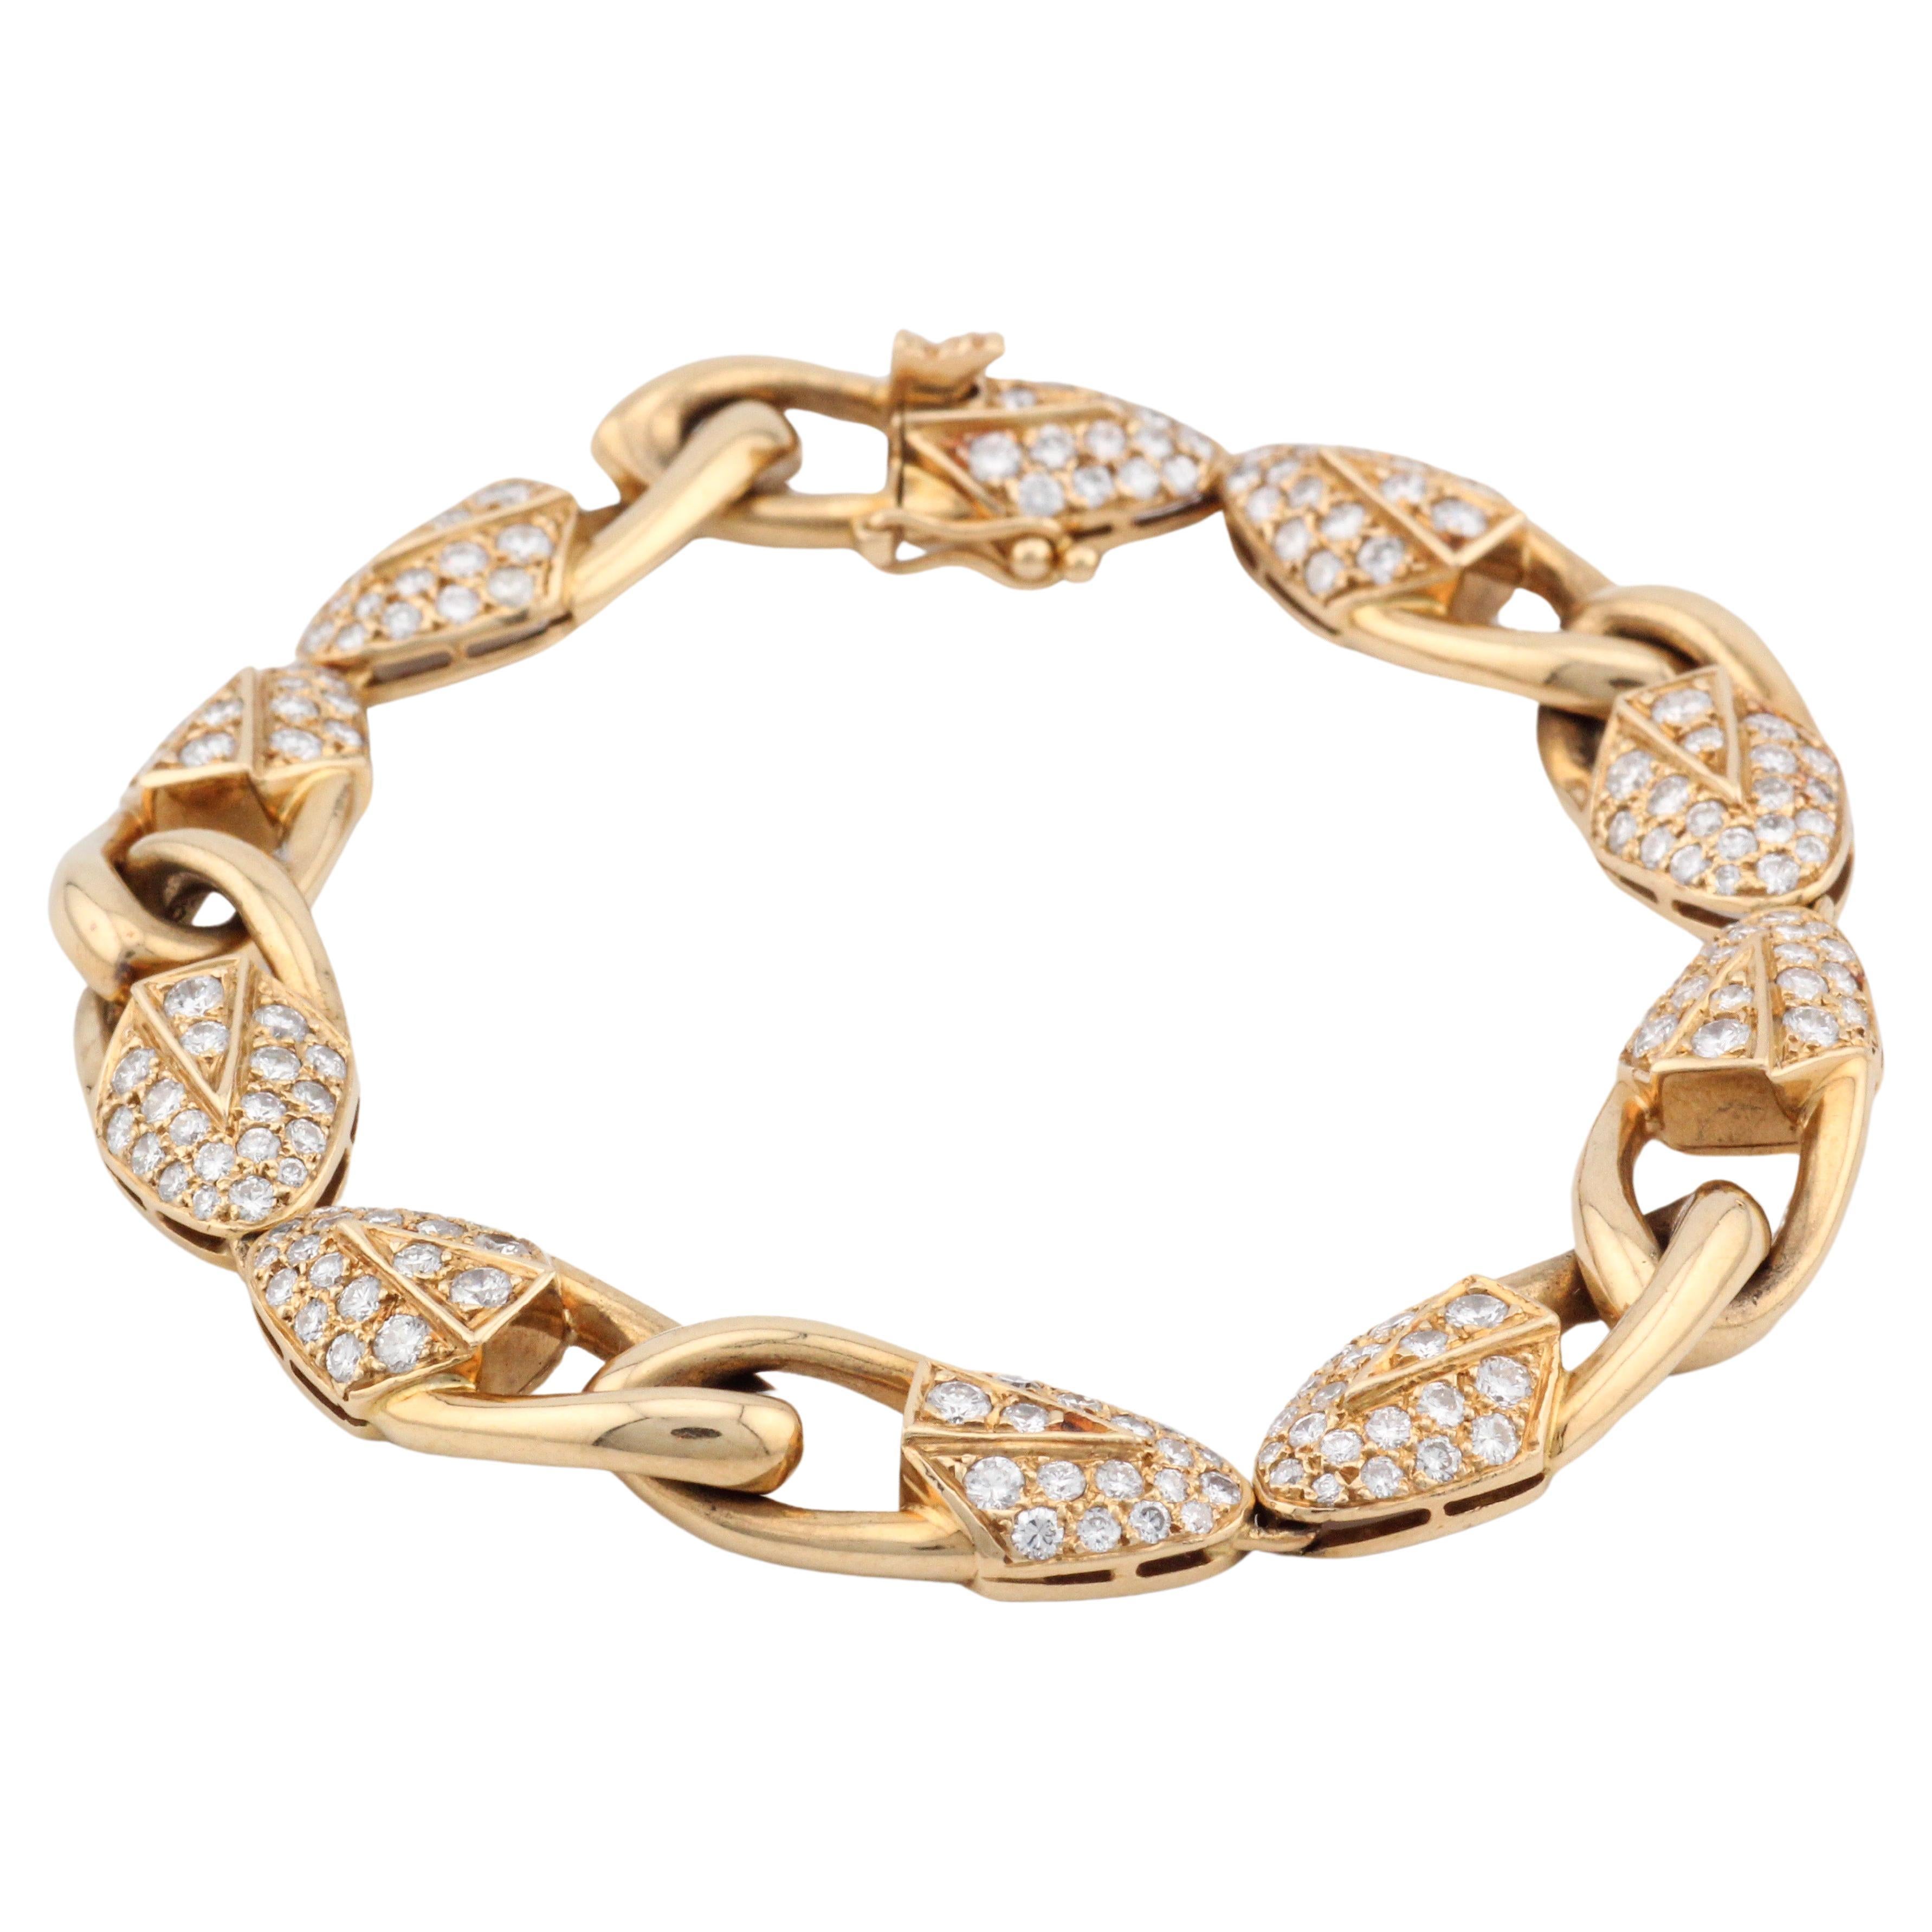 Piaget Brilliant Cut Diamond 18k Yellow Gold Link Bracelet In Good Condition For Sale In New York, NY